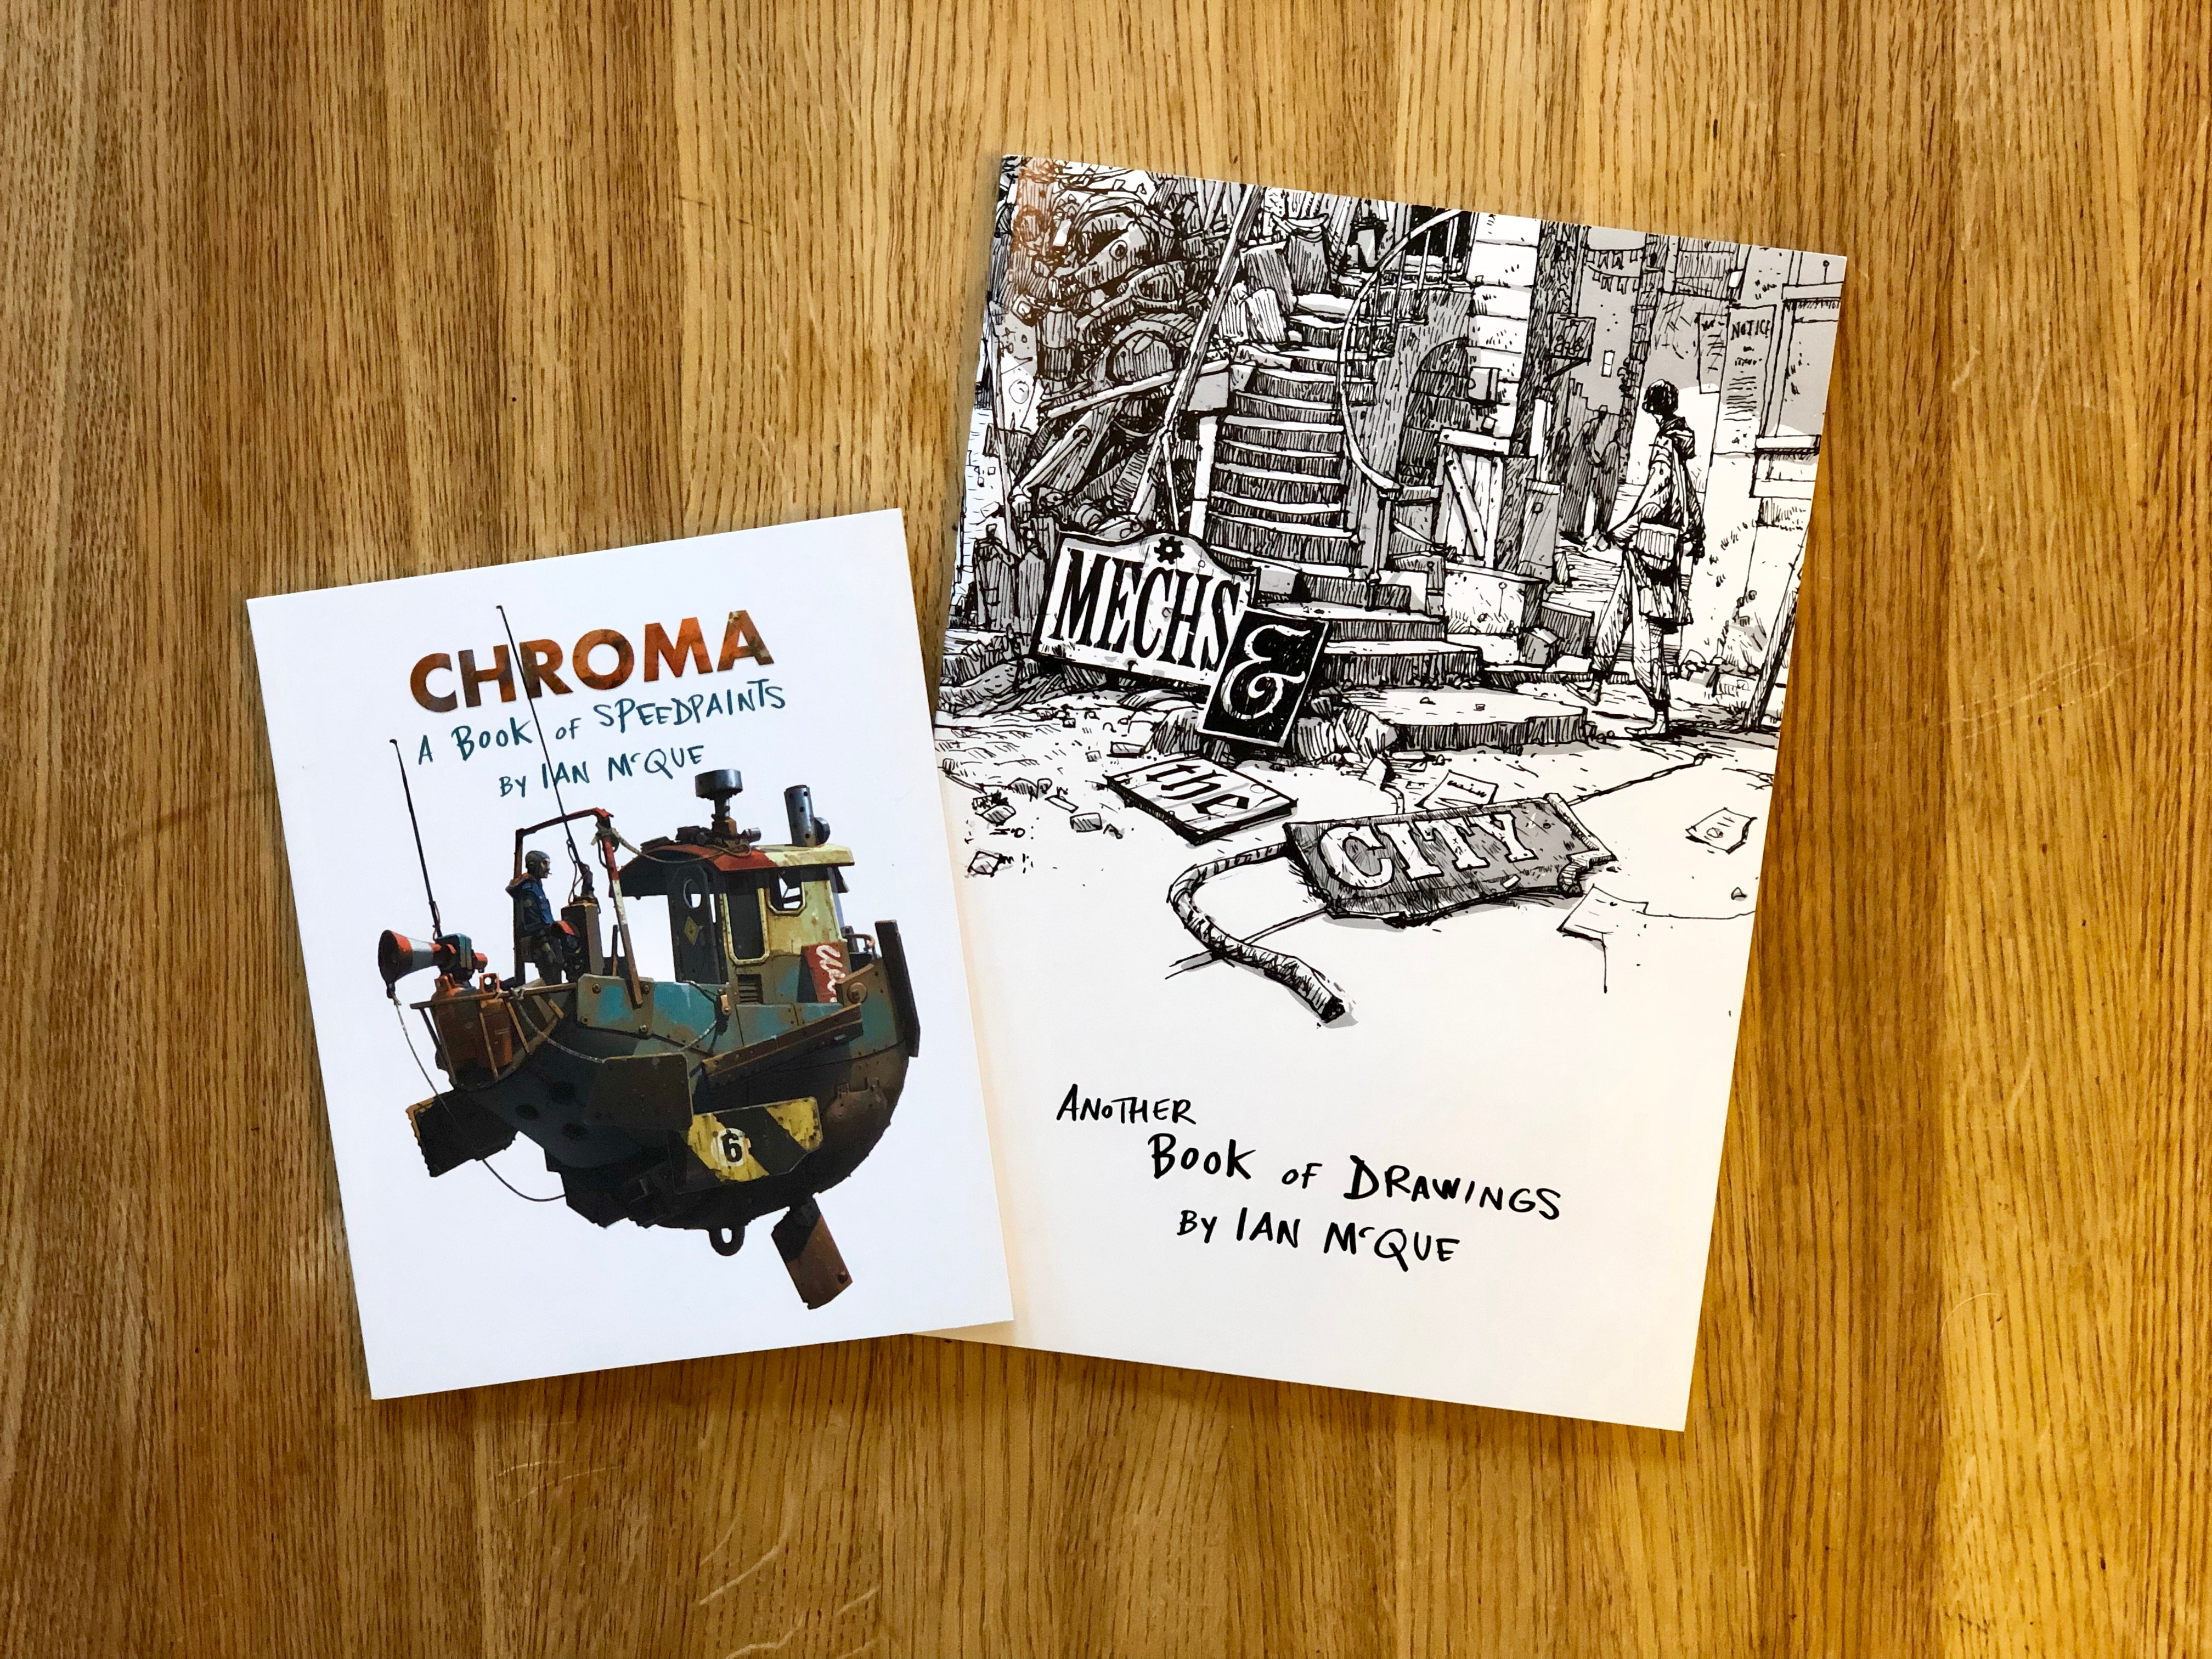 Ian McQues skissböcker Chroma och Another book of drawings.